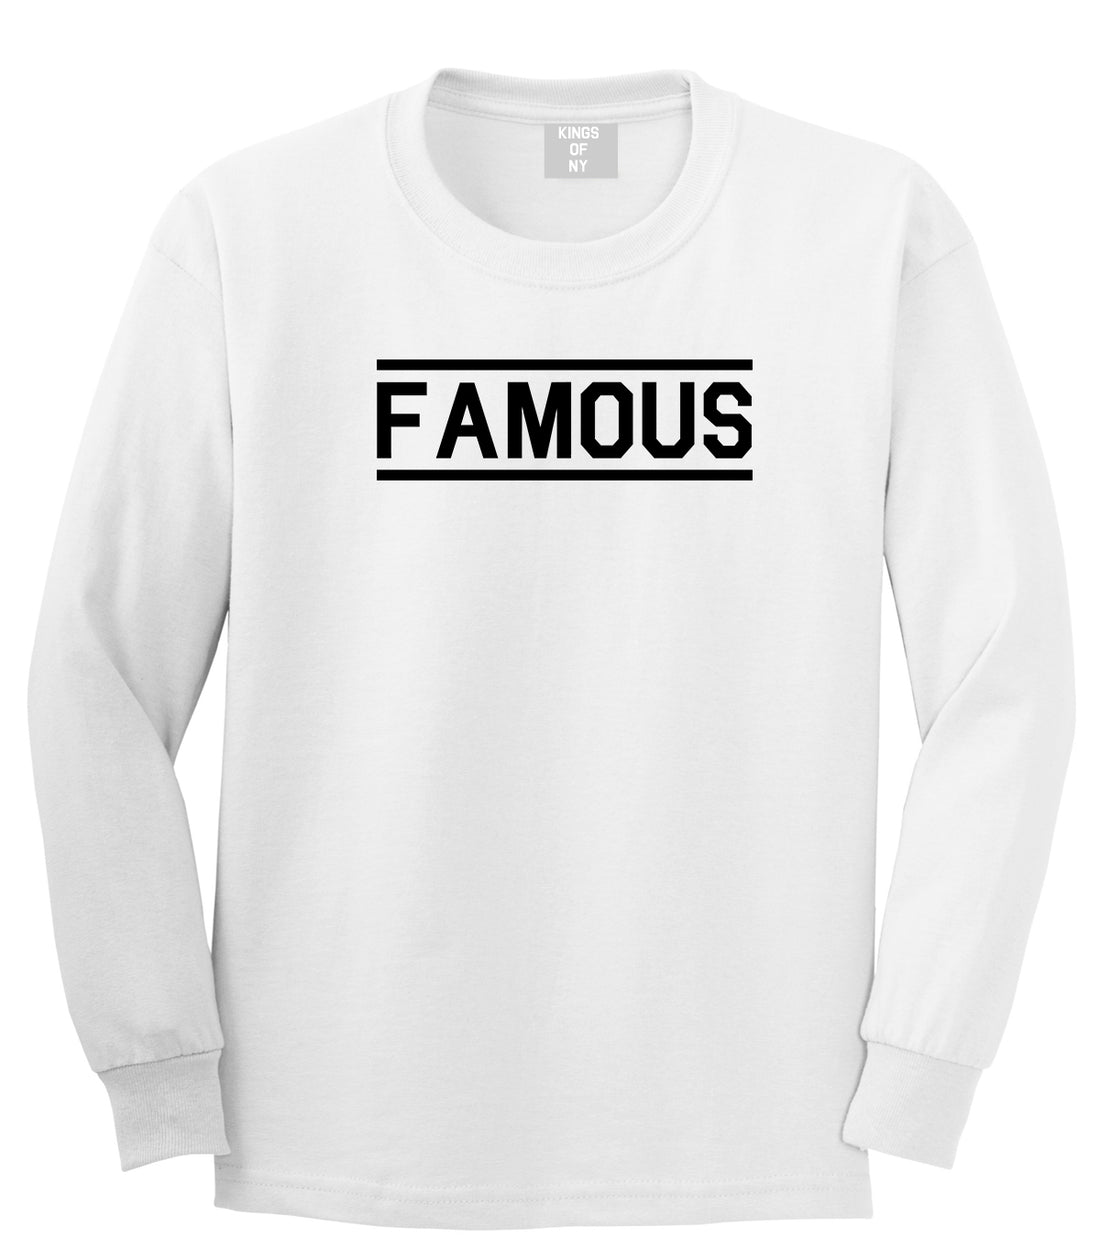 Famous Mens White Long Sleeve T-Shirt by KINGS OF NY